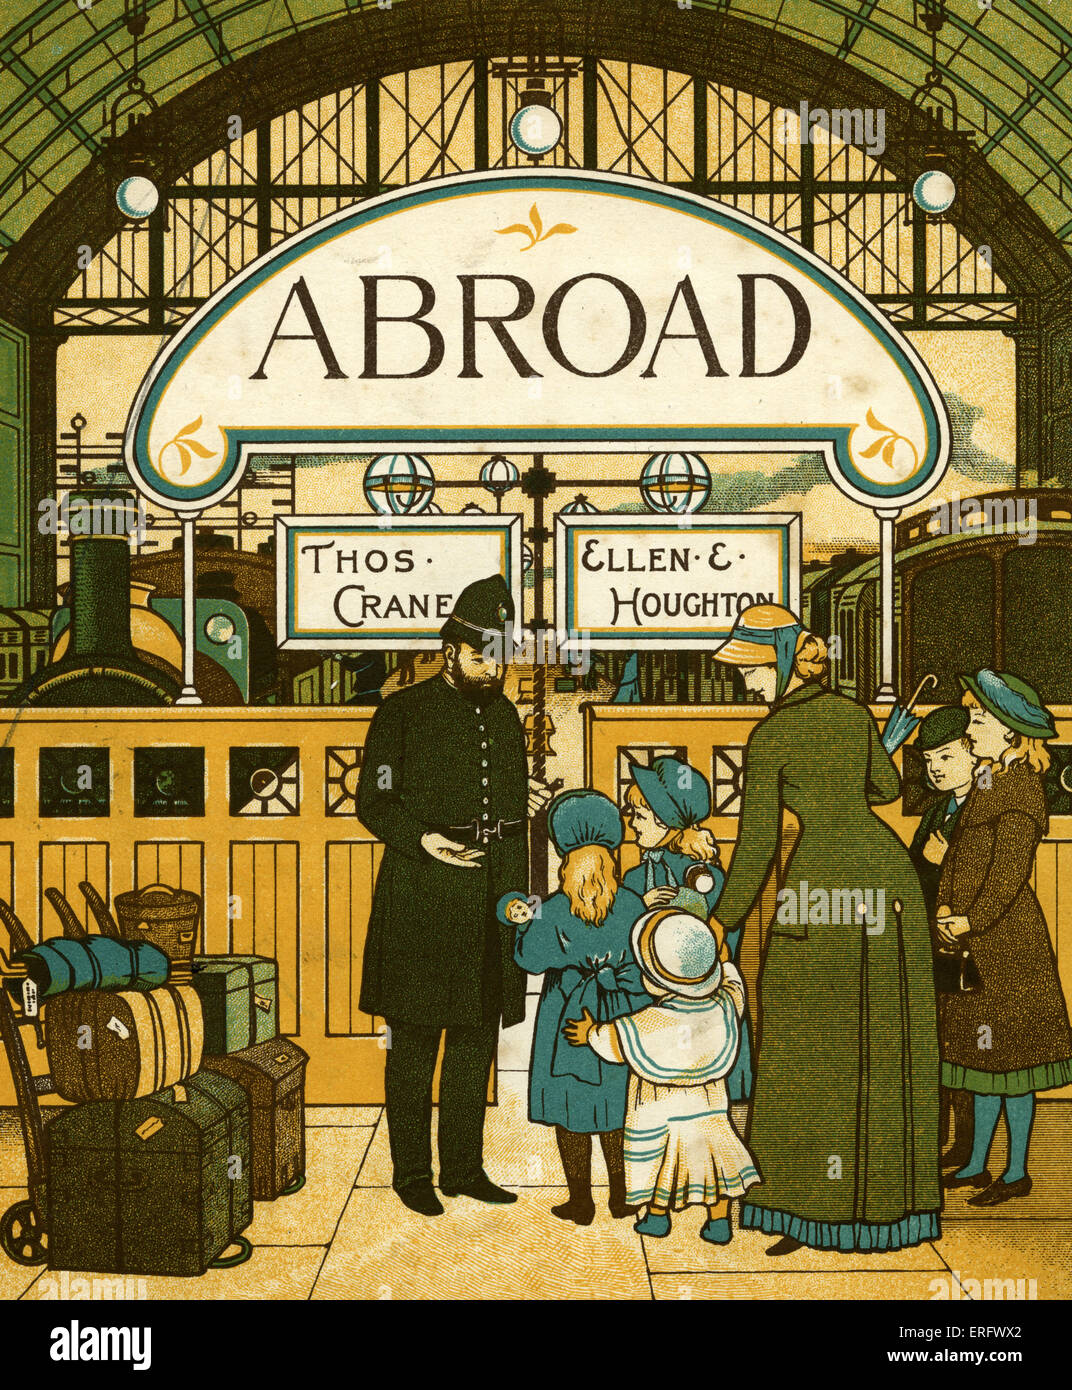 Victorian holidays - boarding the train at the train station in London. Abroad  title page. by Thomas Crane and Ellen E Stock Photo